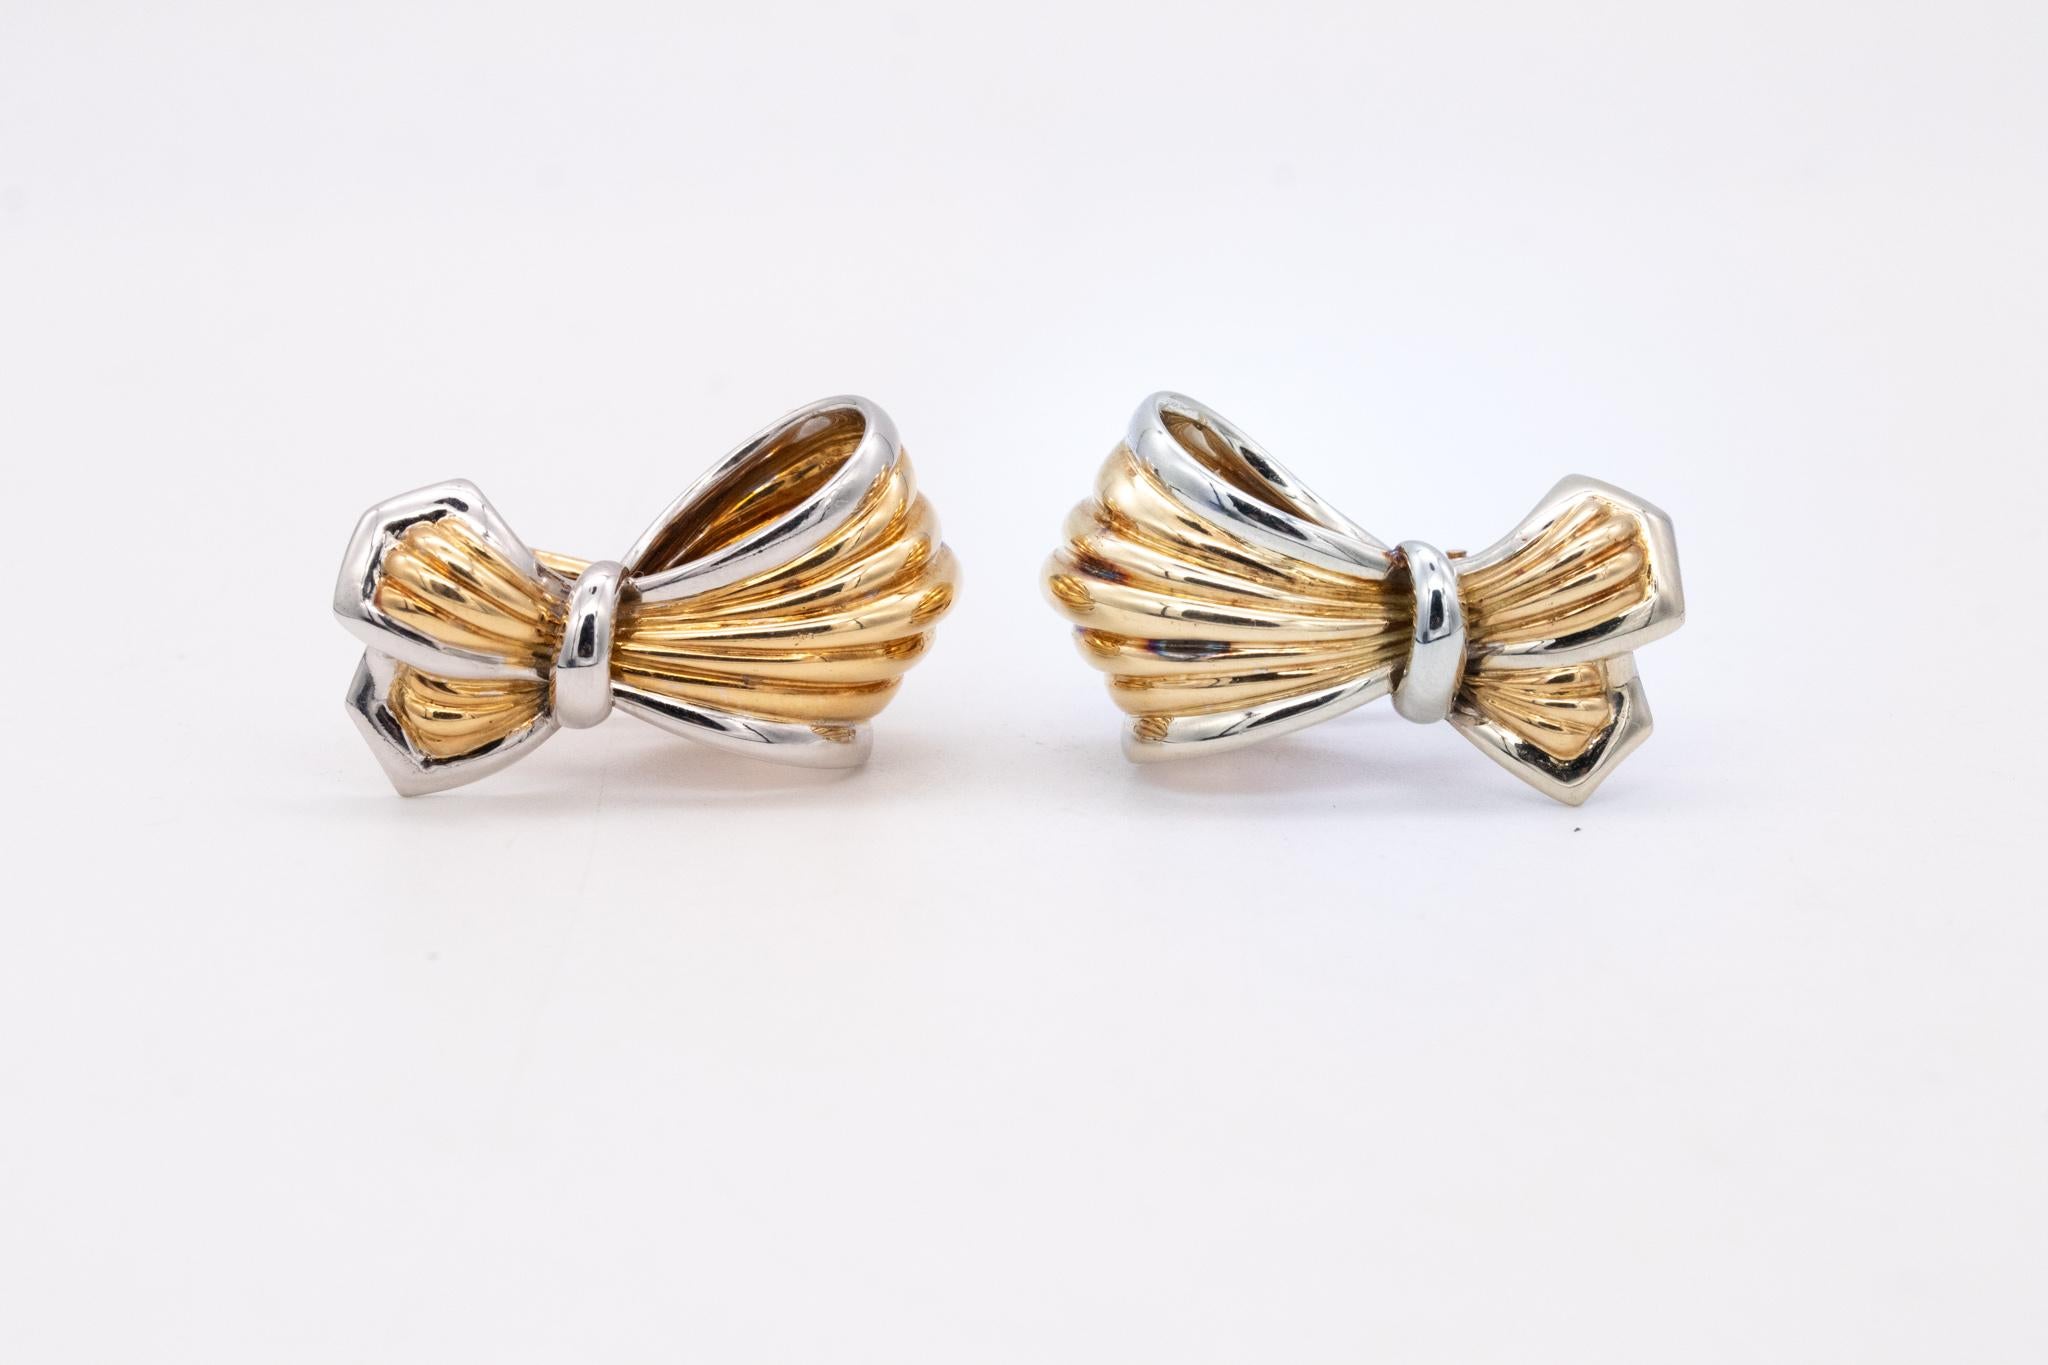 Boucheron Paris Large Ribbons Earrings with Fluted Pattern in Two Tones of 18kt For Sale 2